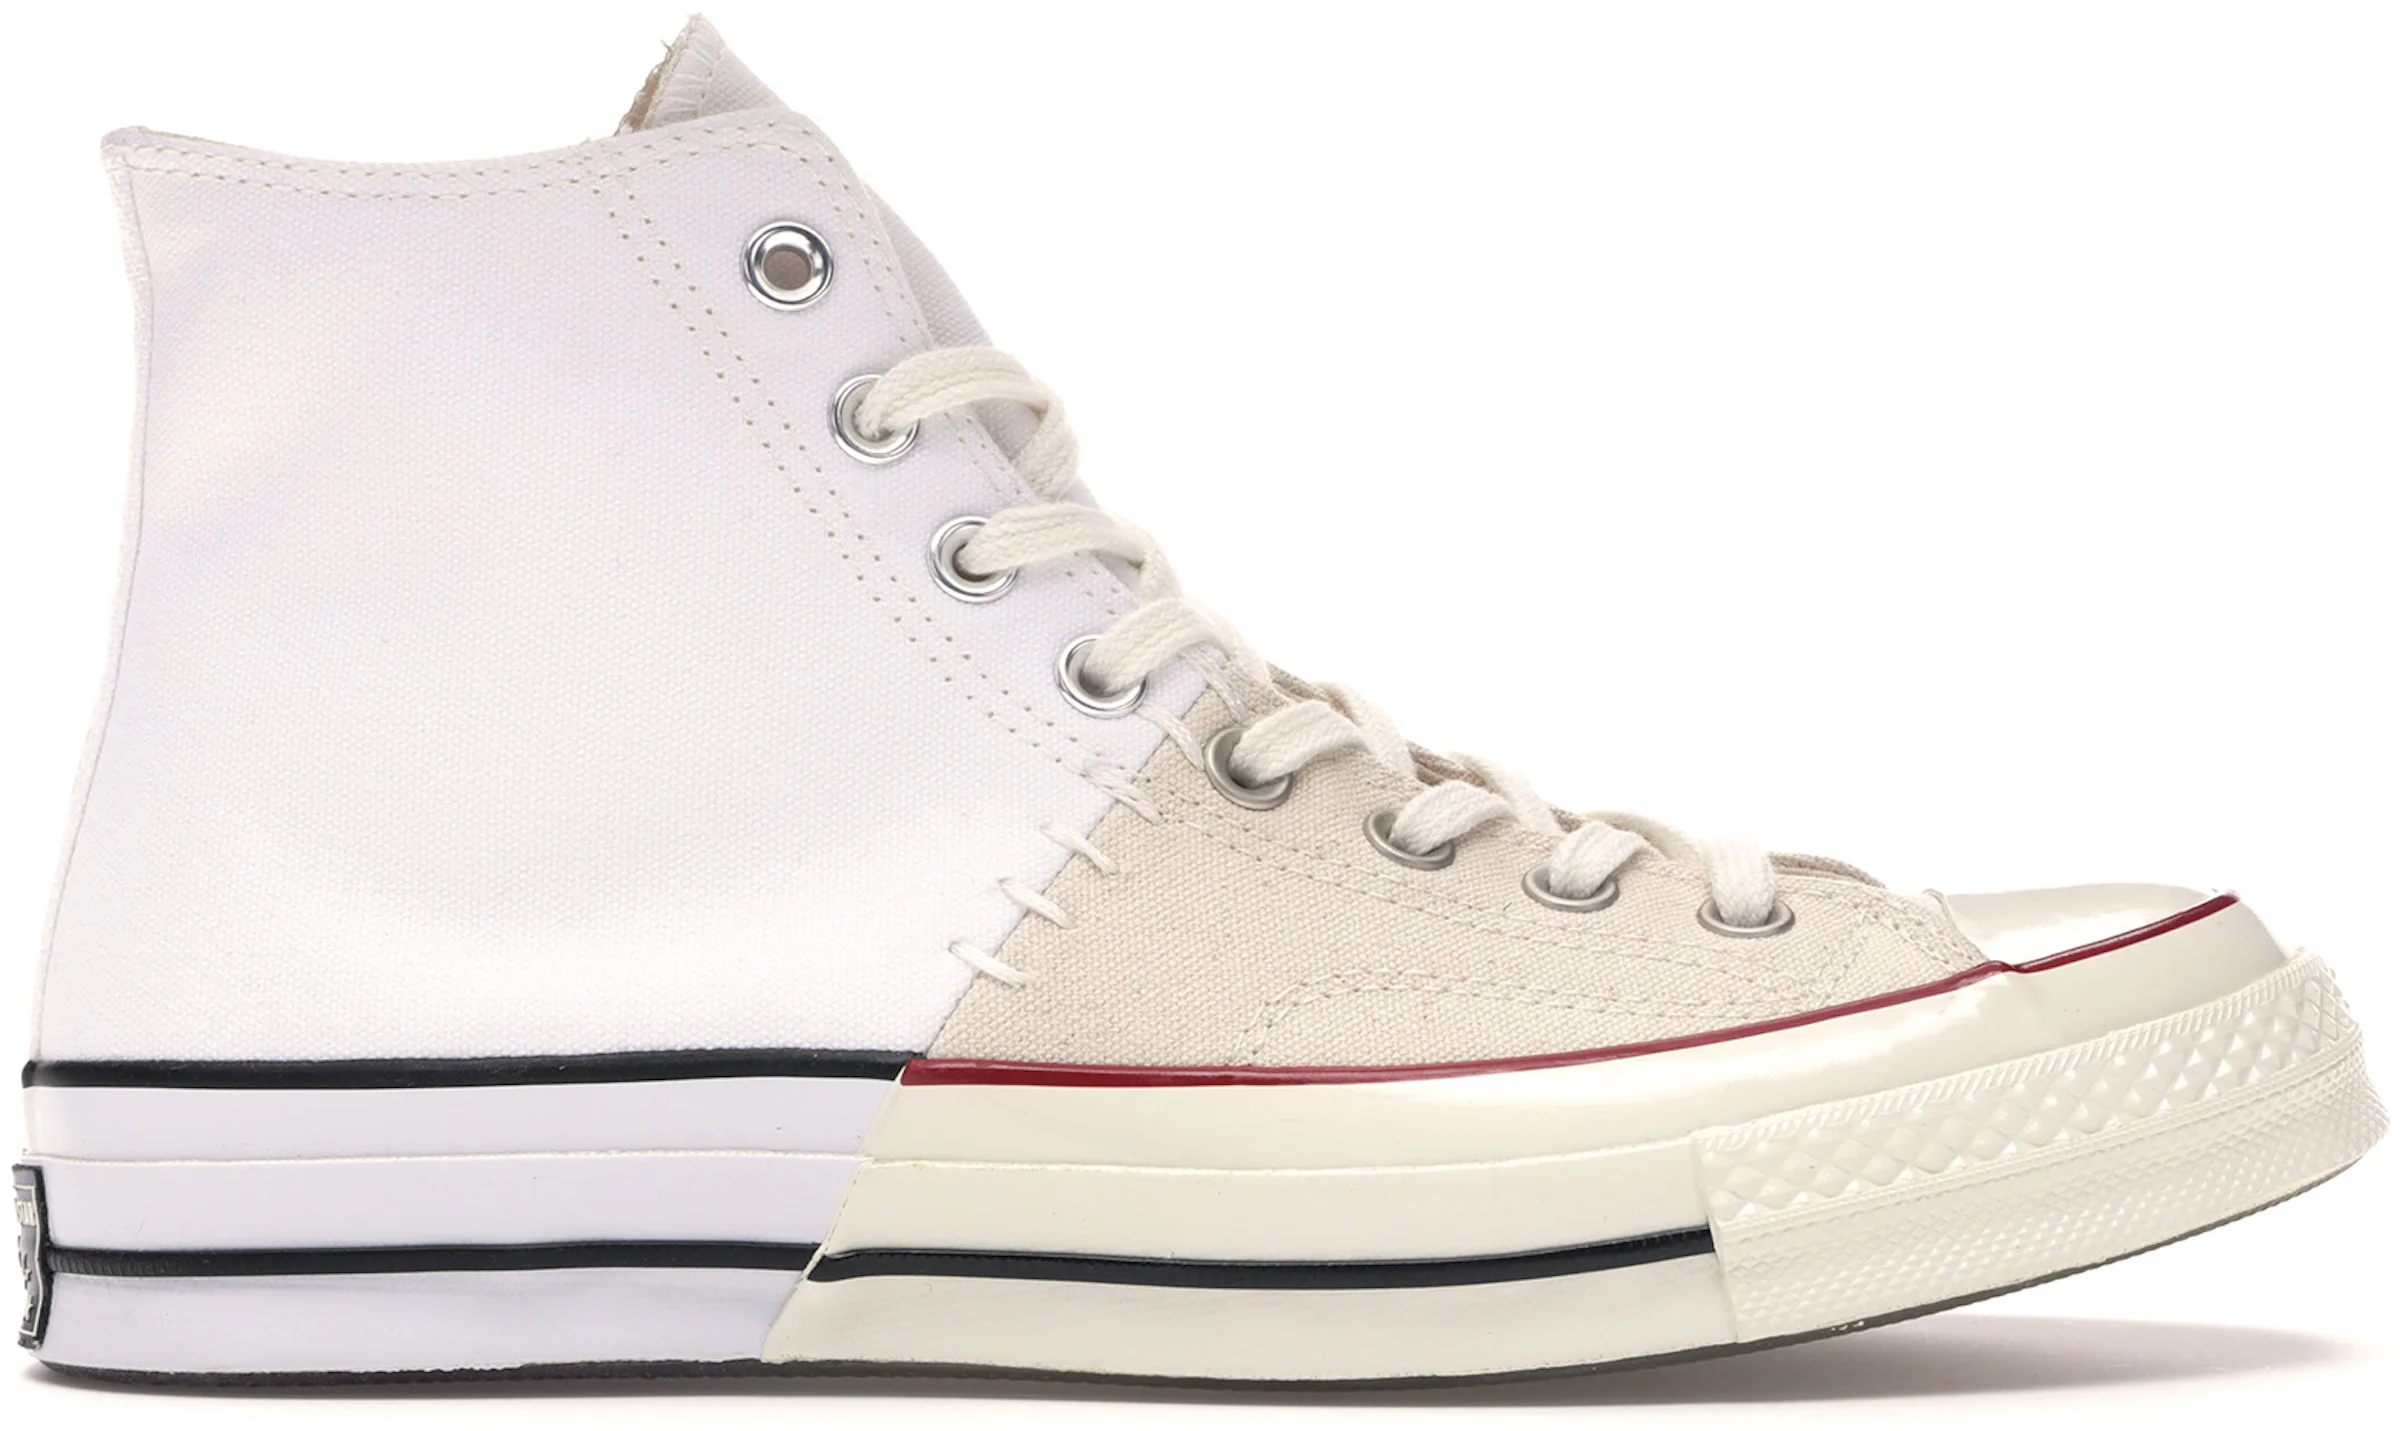 Converse Chuck Taylor All Star 70 Hi Reconstructed Slam Jam White